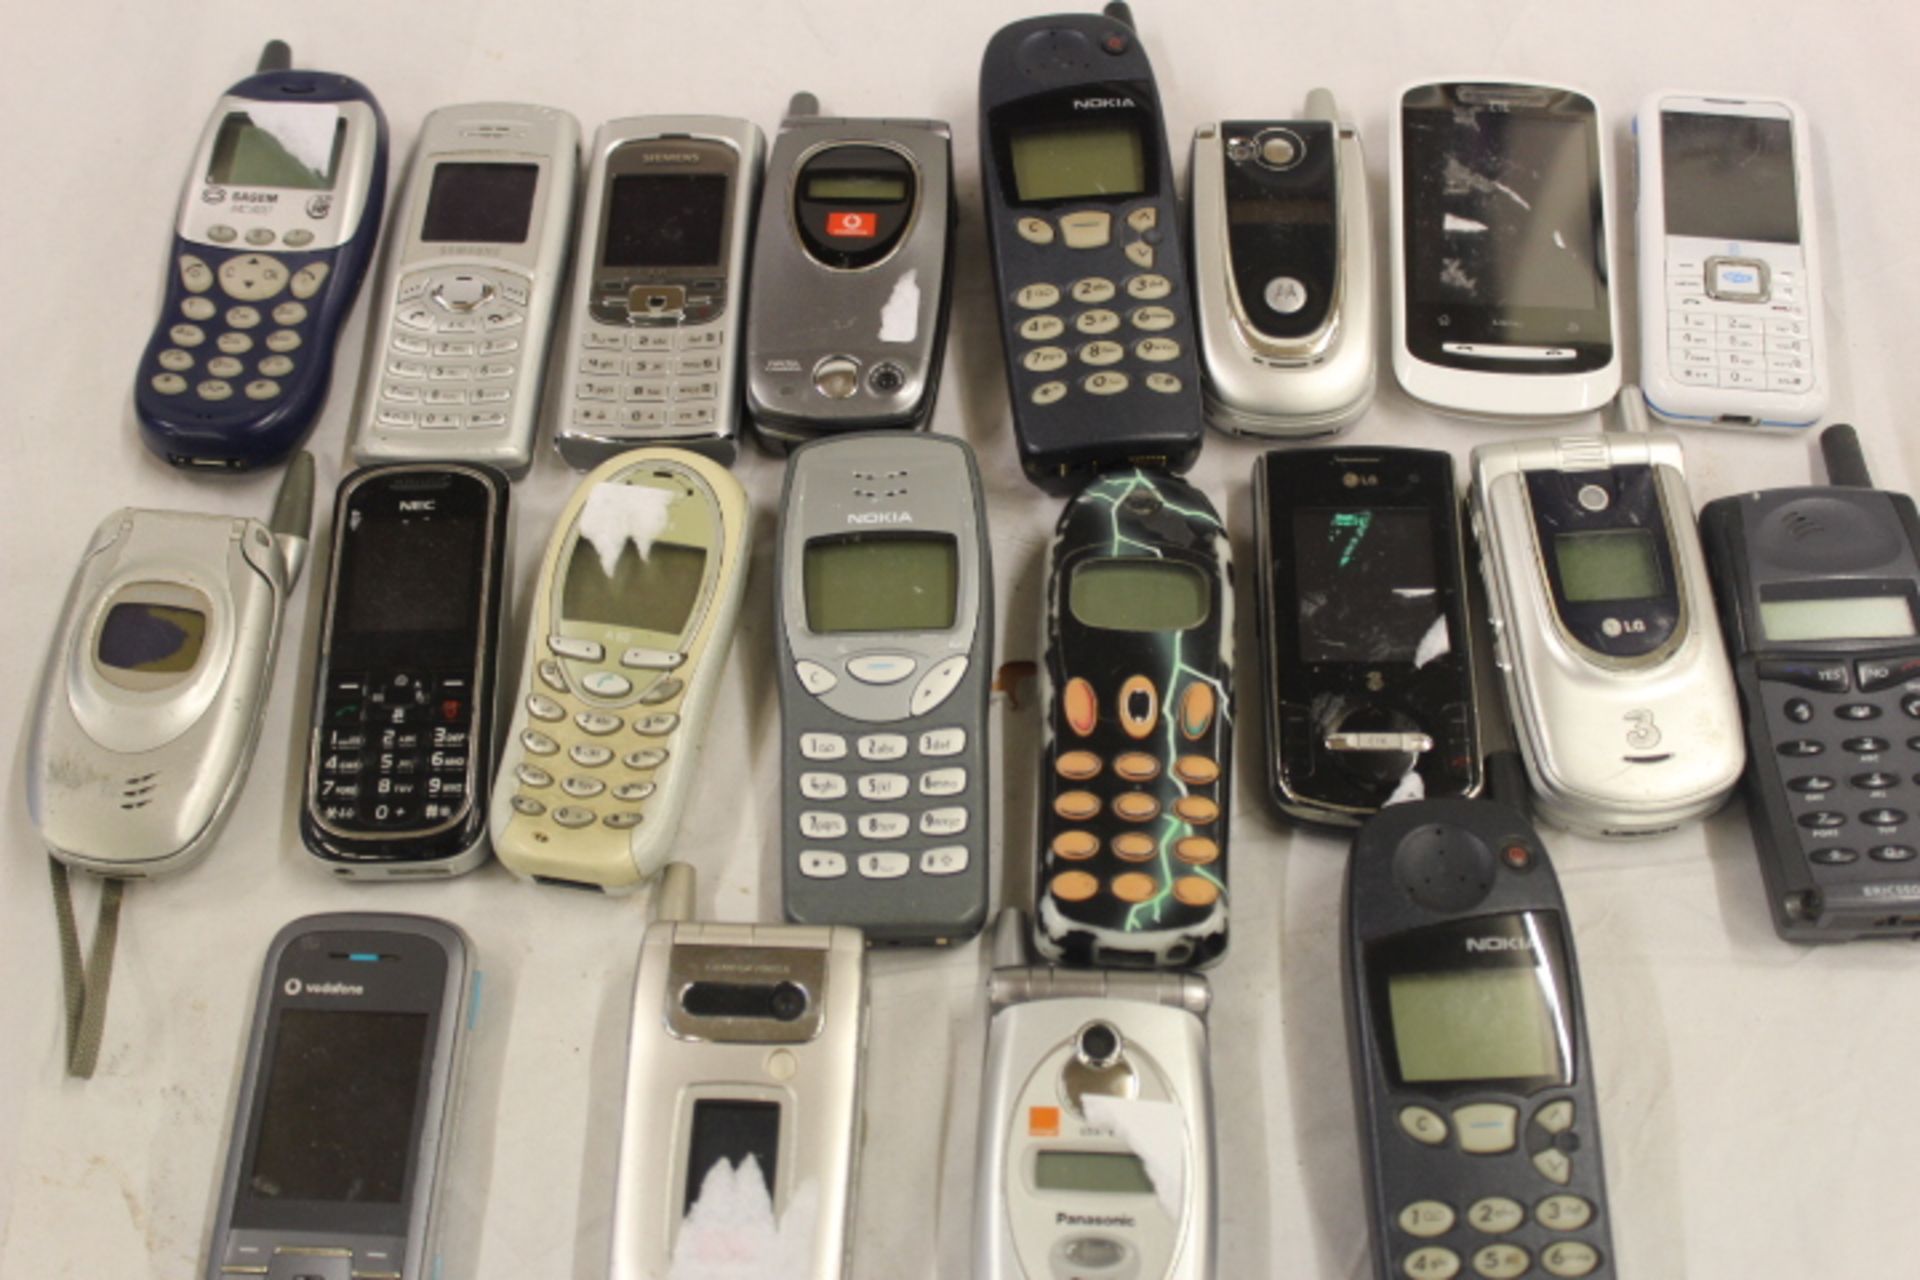 20 Mobile Phones Including Three